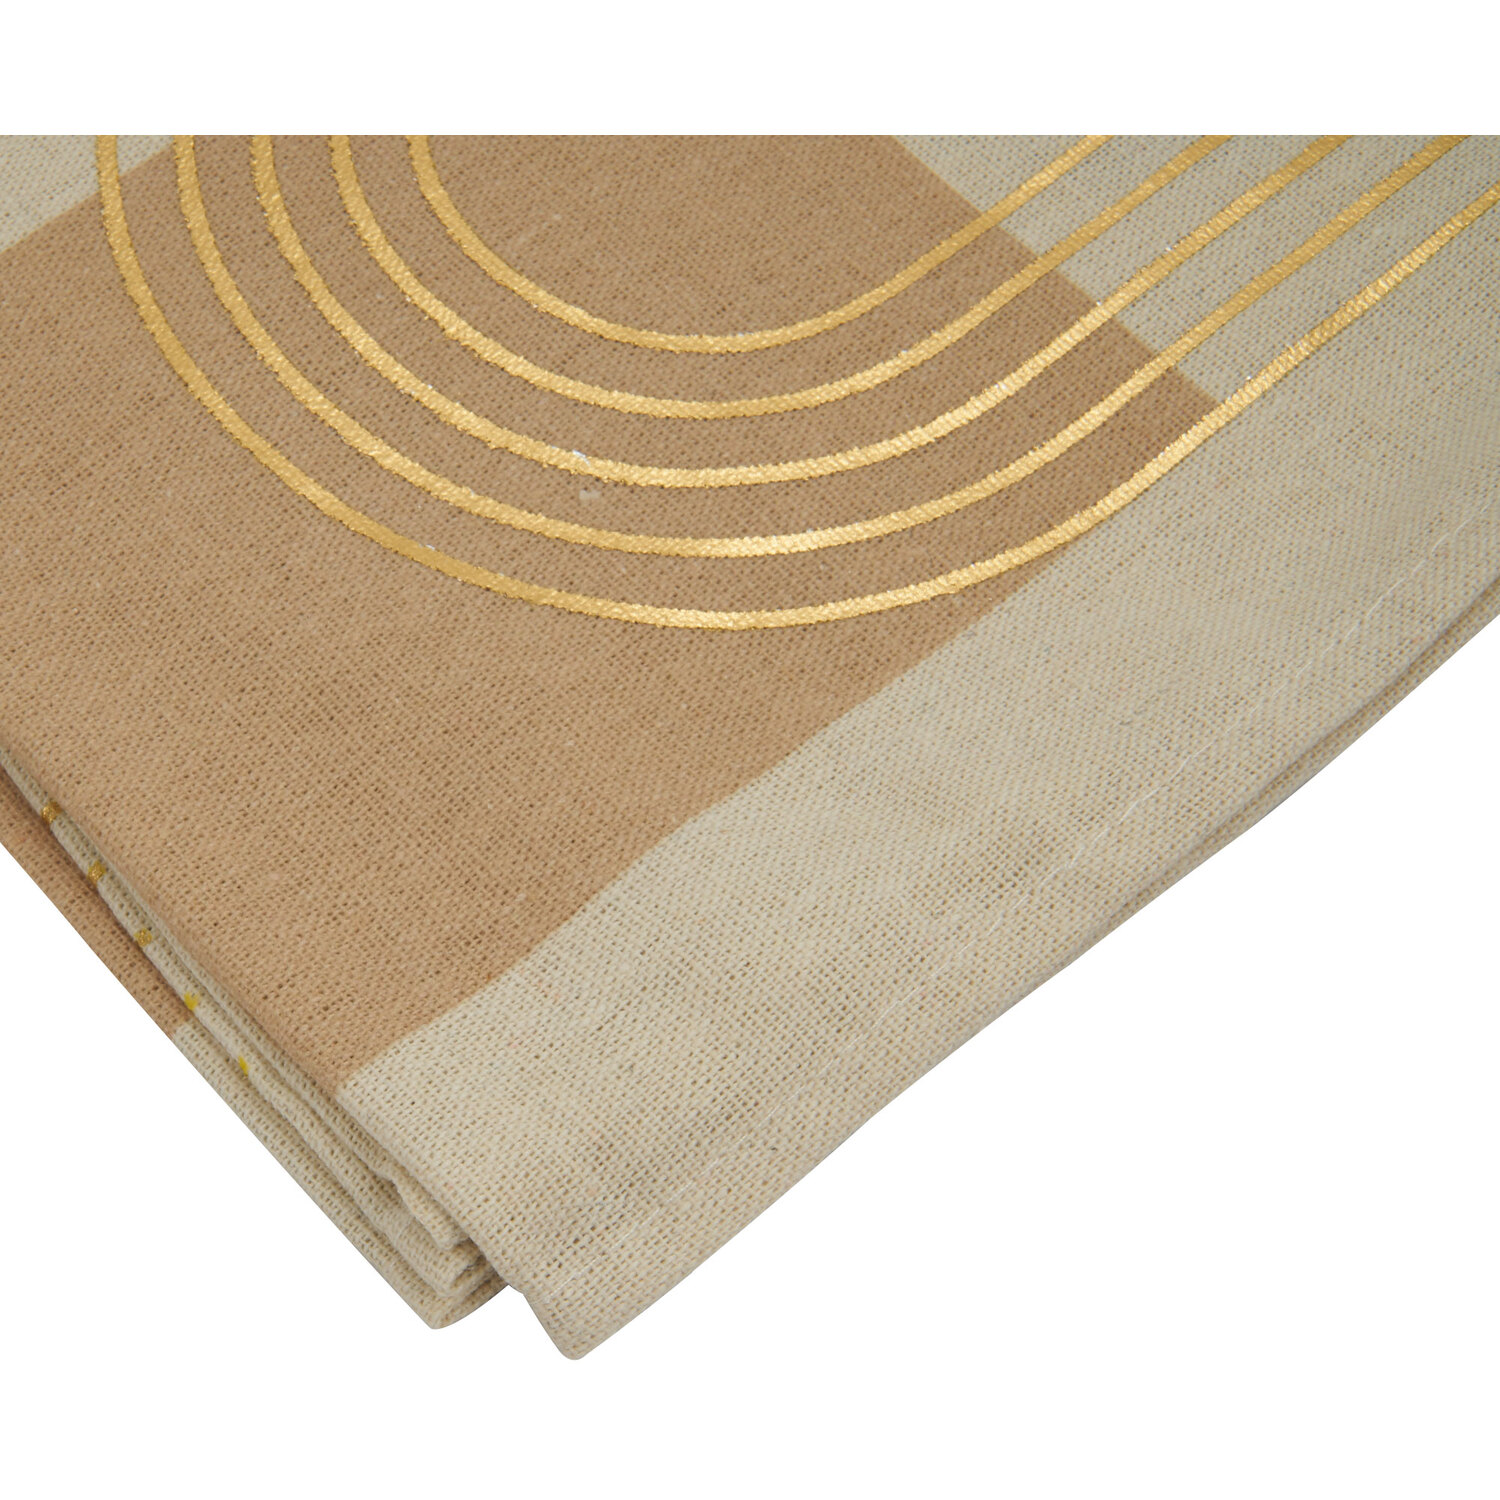 Sanctuary Foiled Abstract Table Runner - Natural Image 4